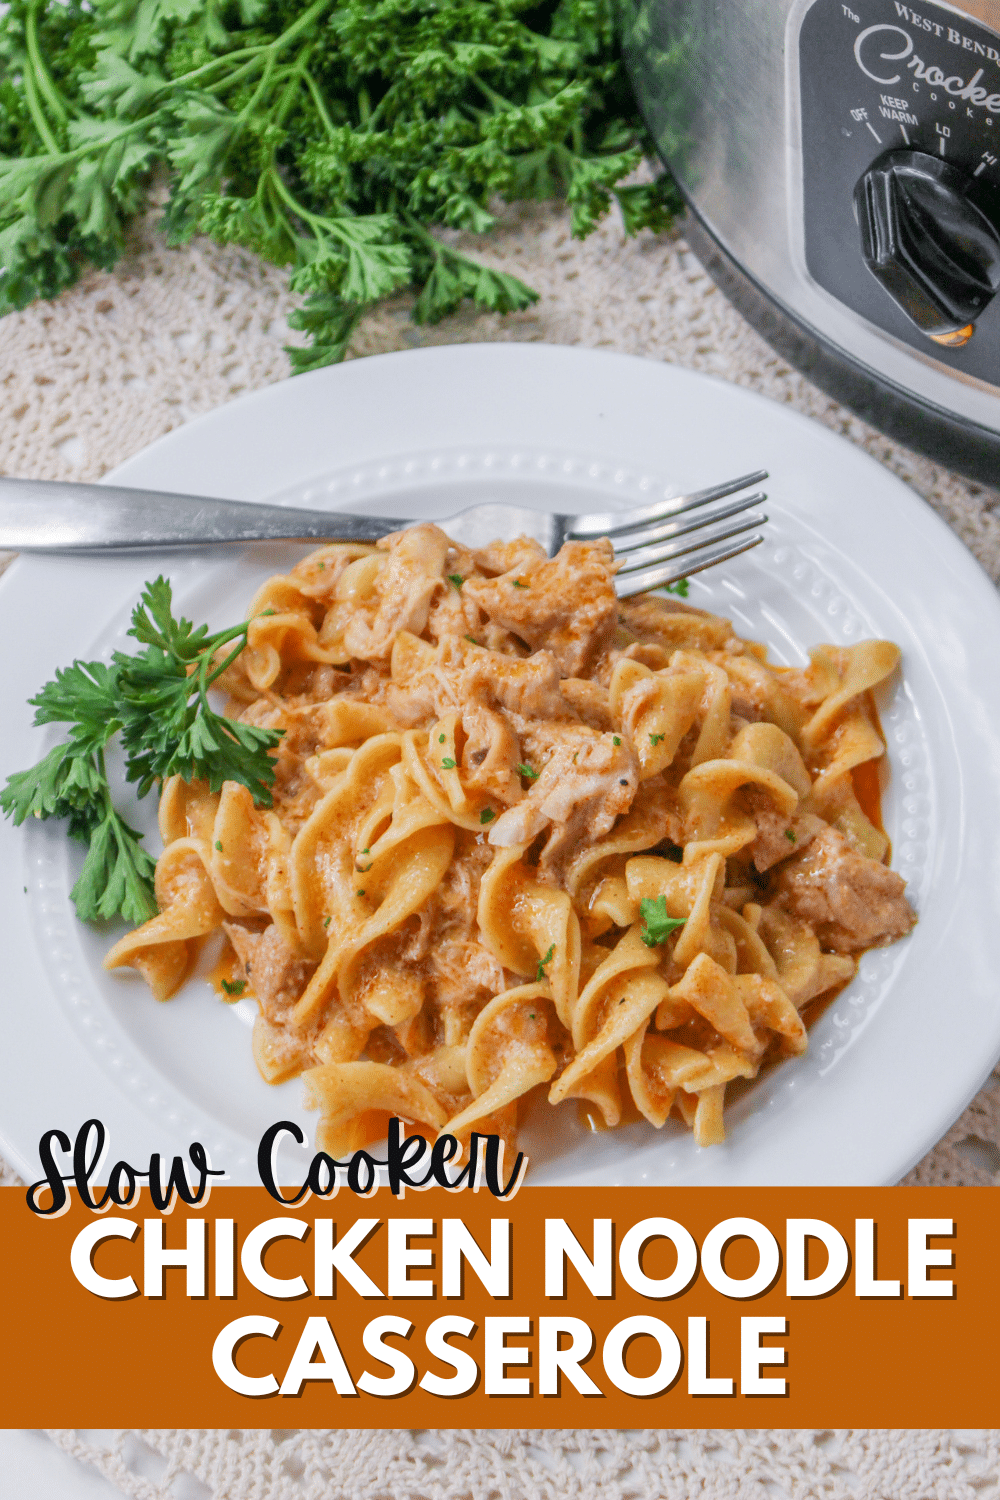 Simplify your next dinner without sacrificing taste with this warm and delicious Chicken Noodle Crockpot Casserole. #chickennoodlecrockpotcasserole #slowcookerchicken #chickennoodle #chickenandnoodlesrecipe #creamychicken via @wondermomwannab